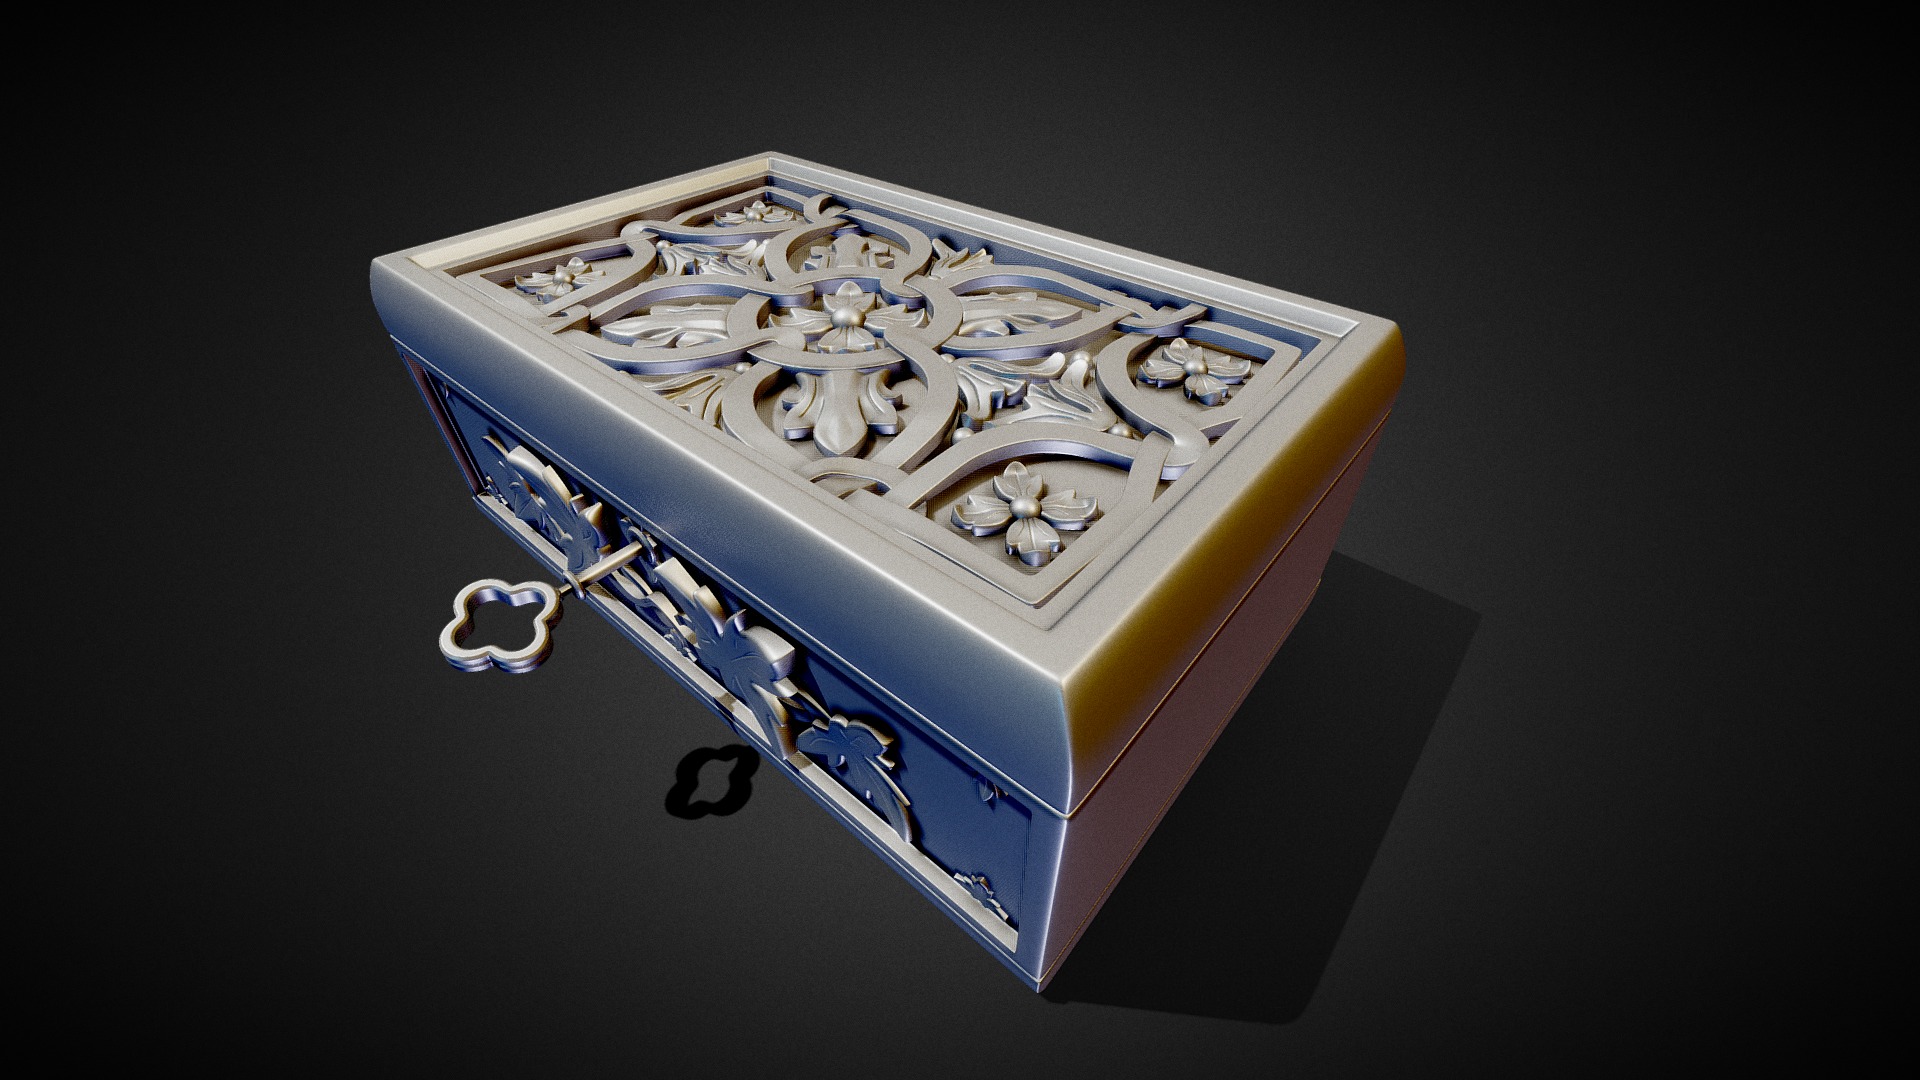 3D model 3D Jewelry Box – High Poly - This is a 3D model of the 3D Jewelry Box - High Poly. The 3D model is about a blue and white box.